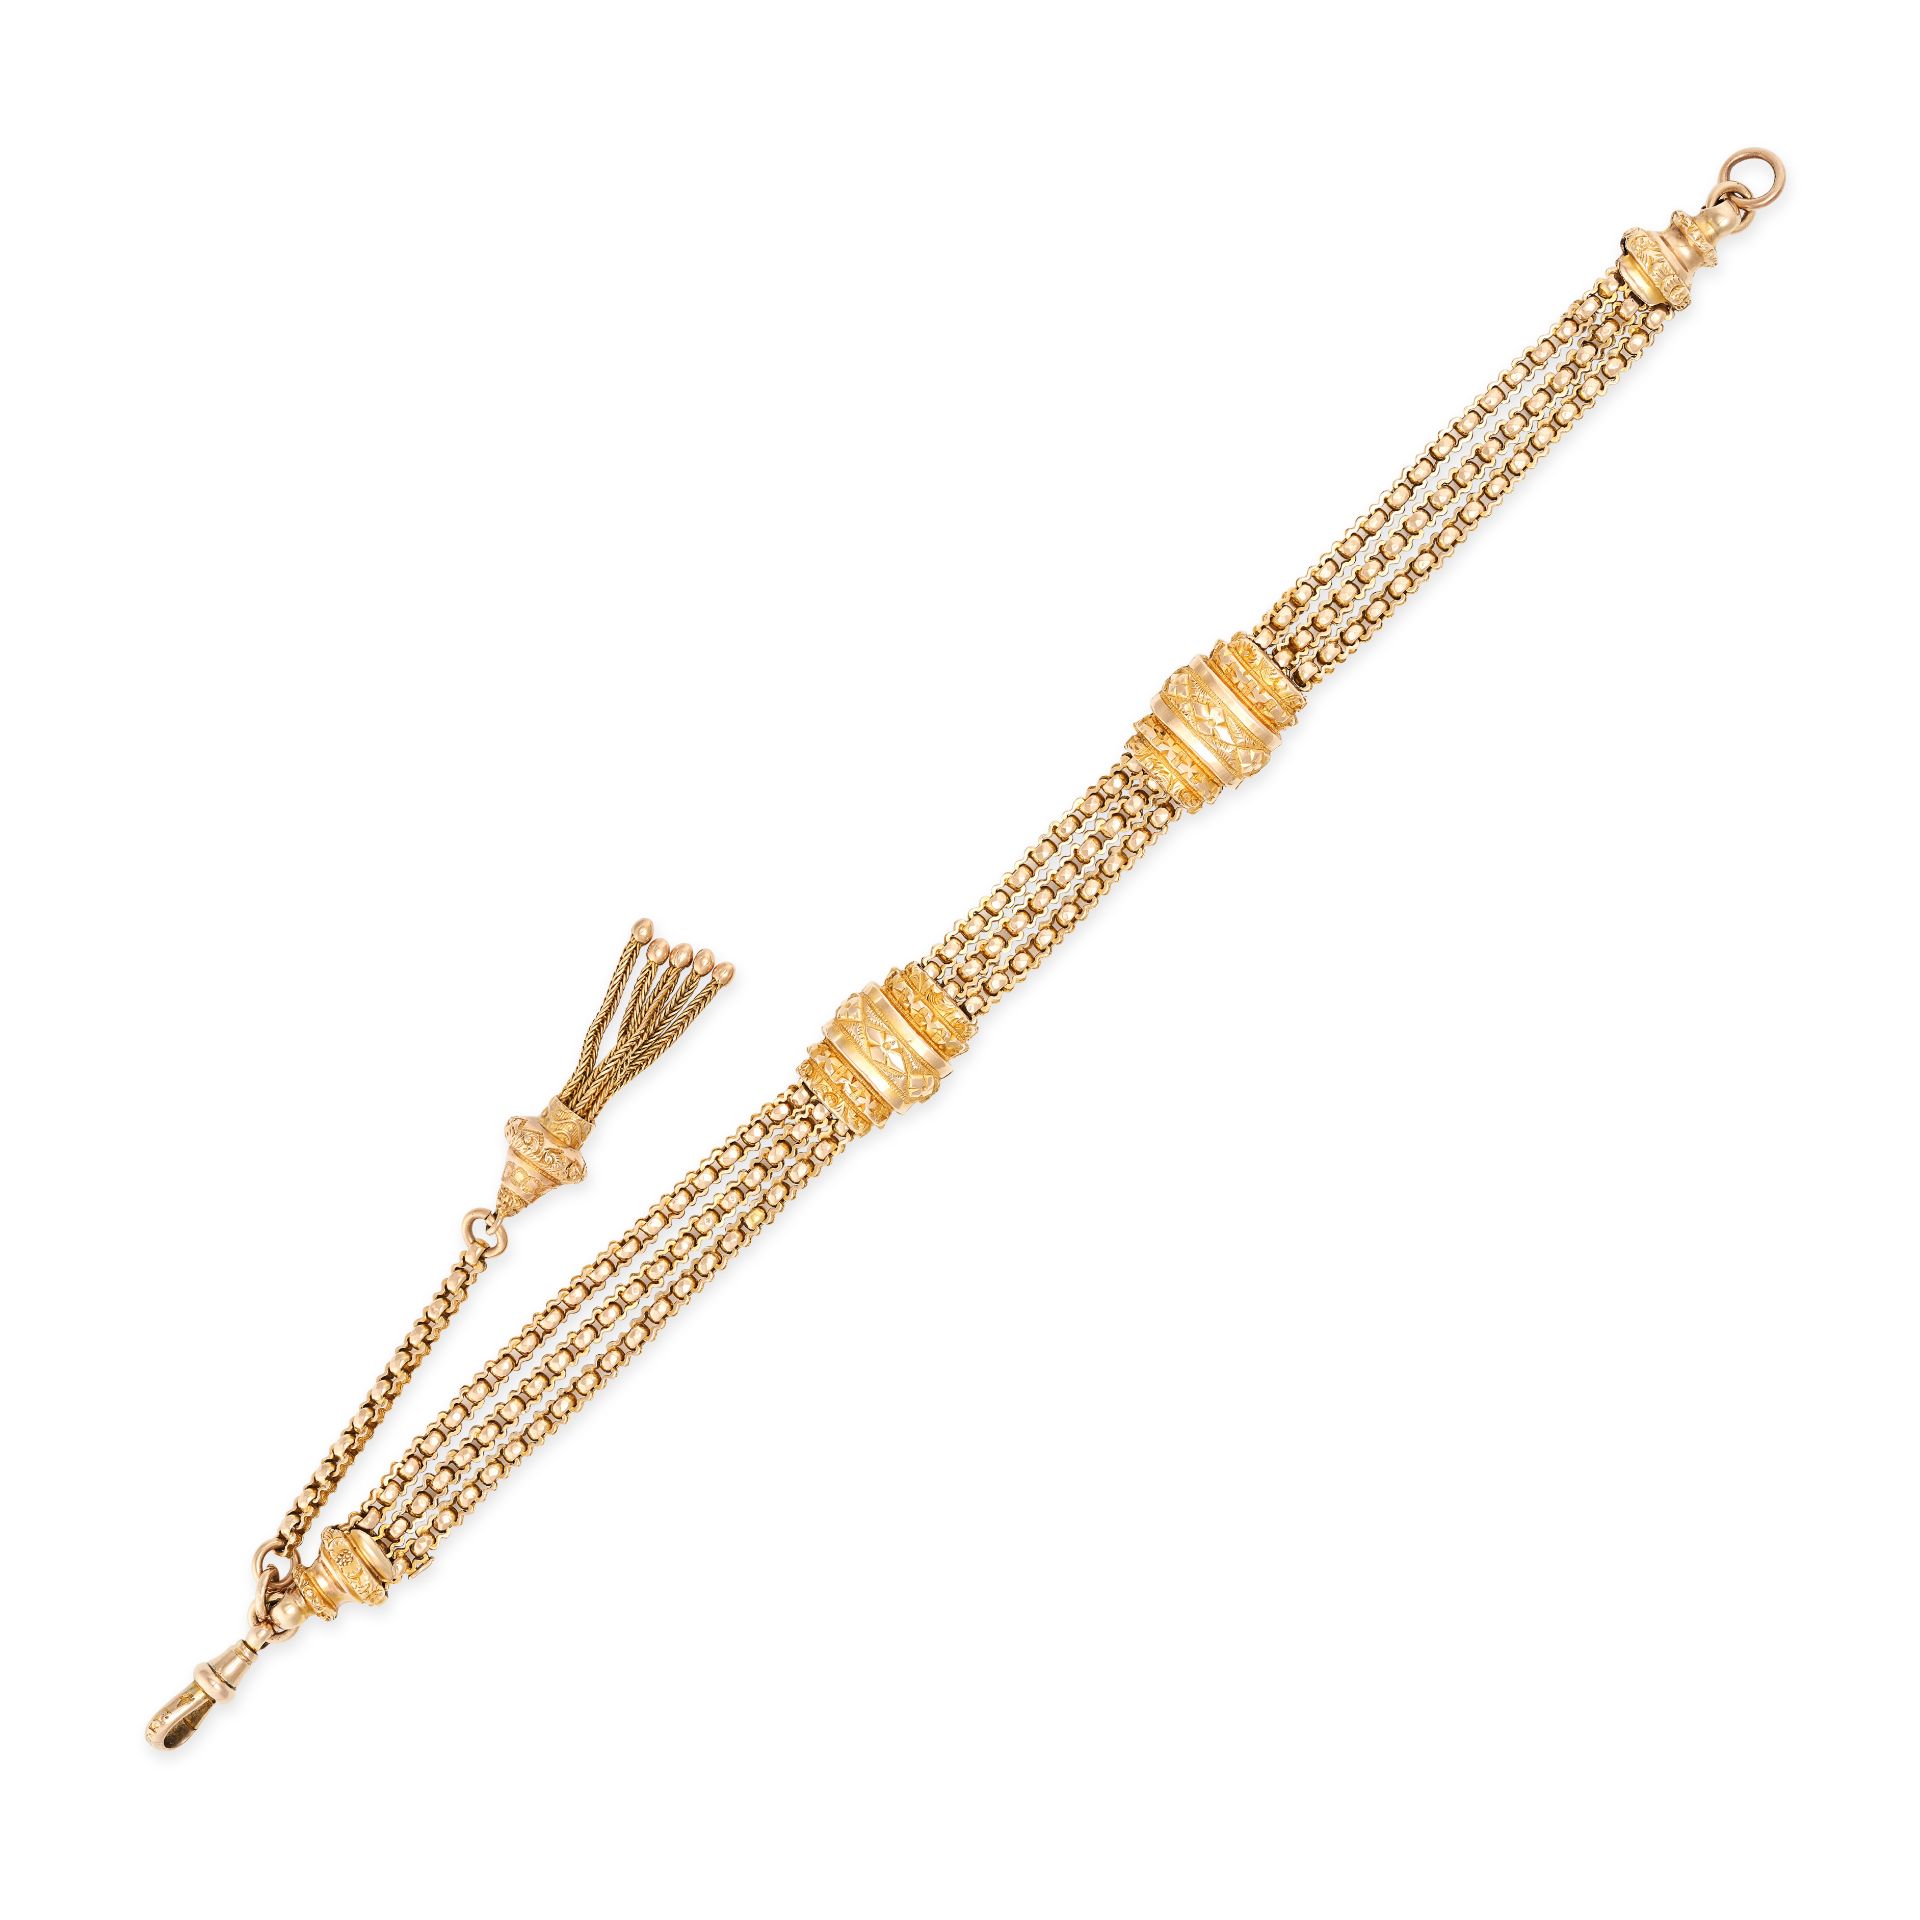 AN ANTIQUE ALBERT WATCH CHAIN in 9ct yellow gold, comprising three chains with engraved sliders t...